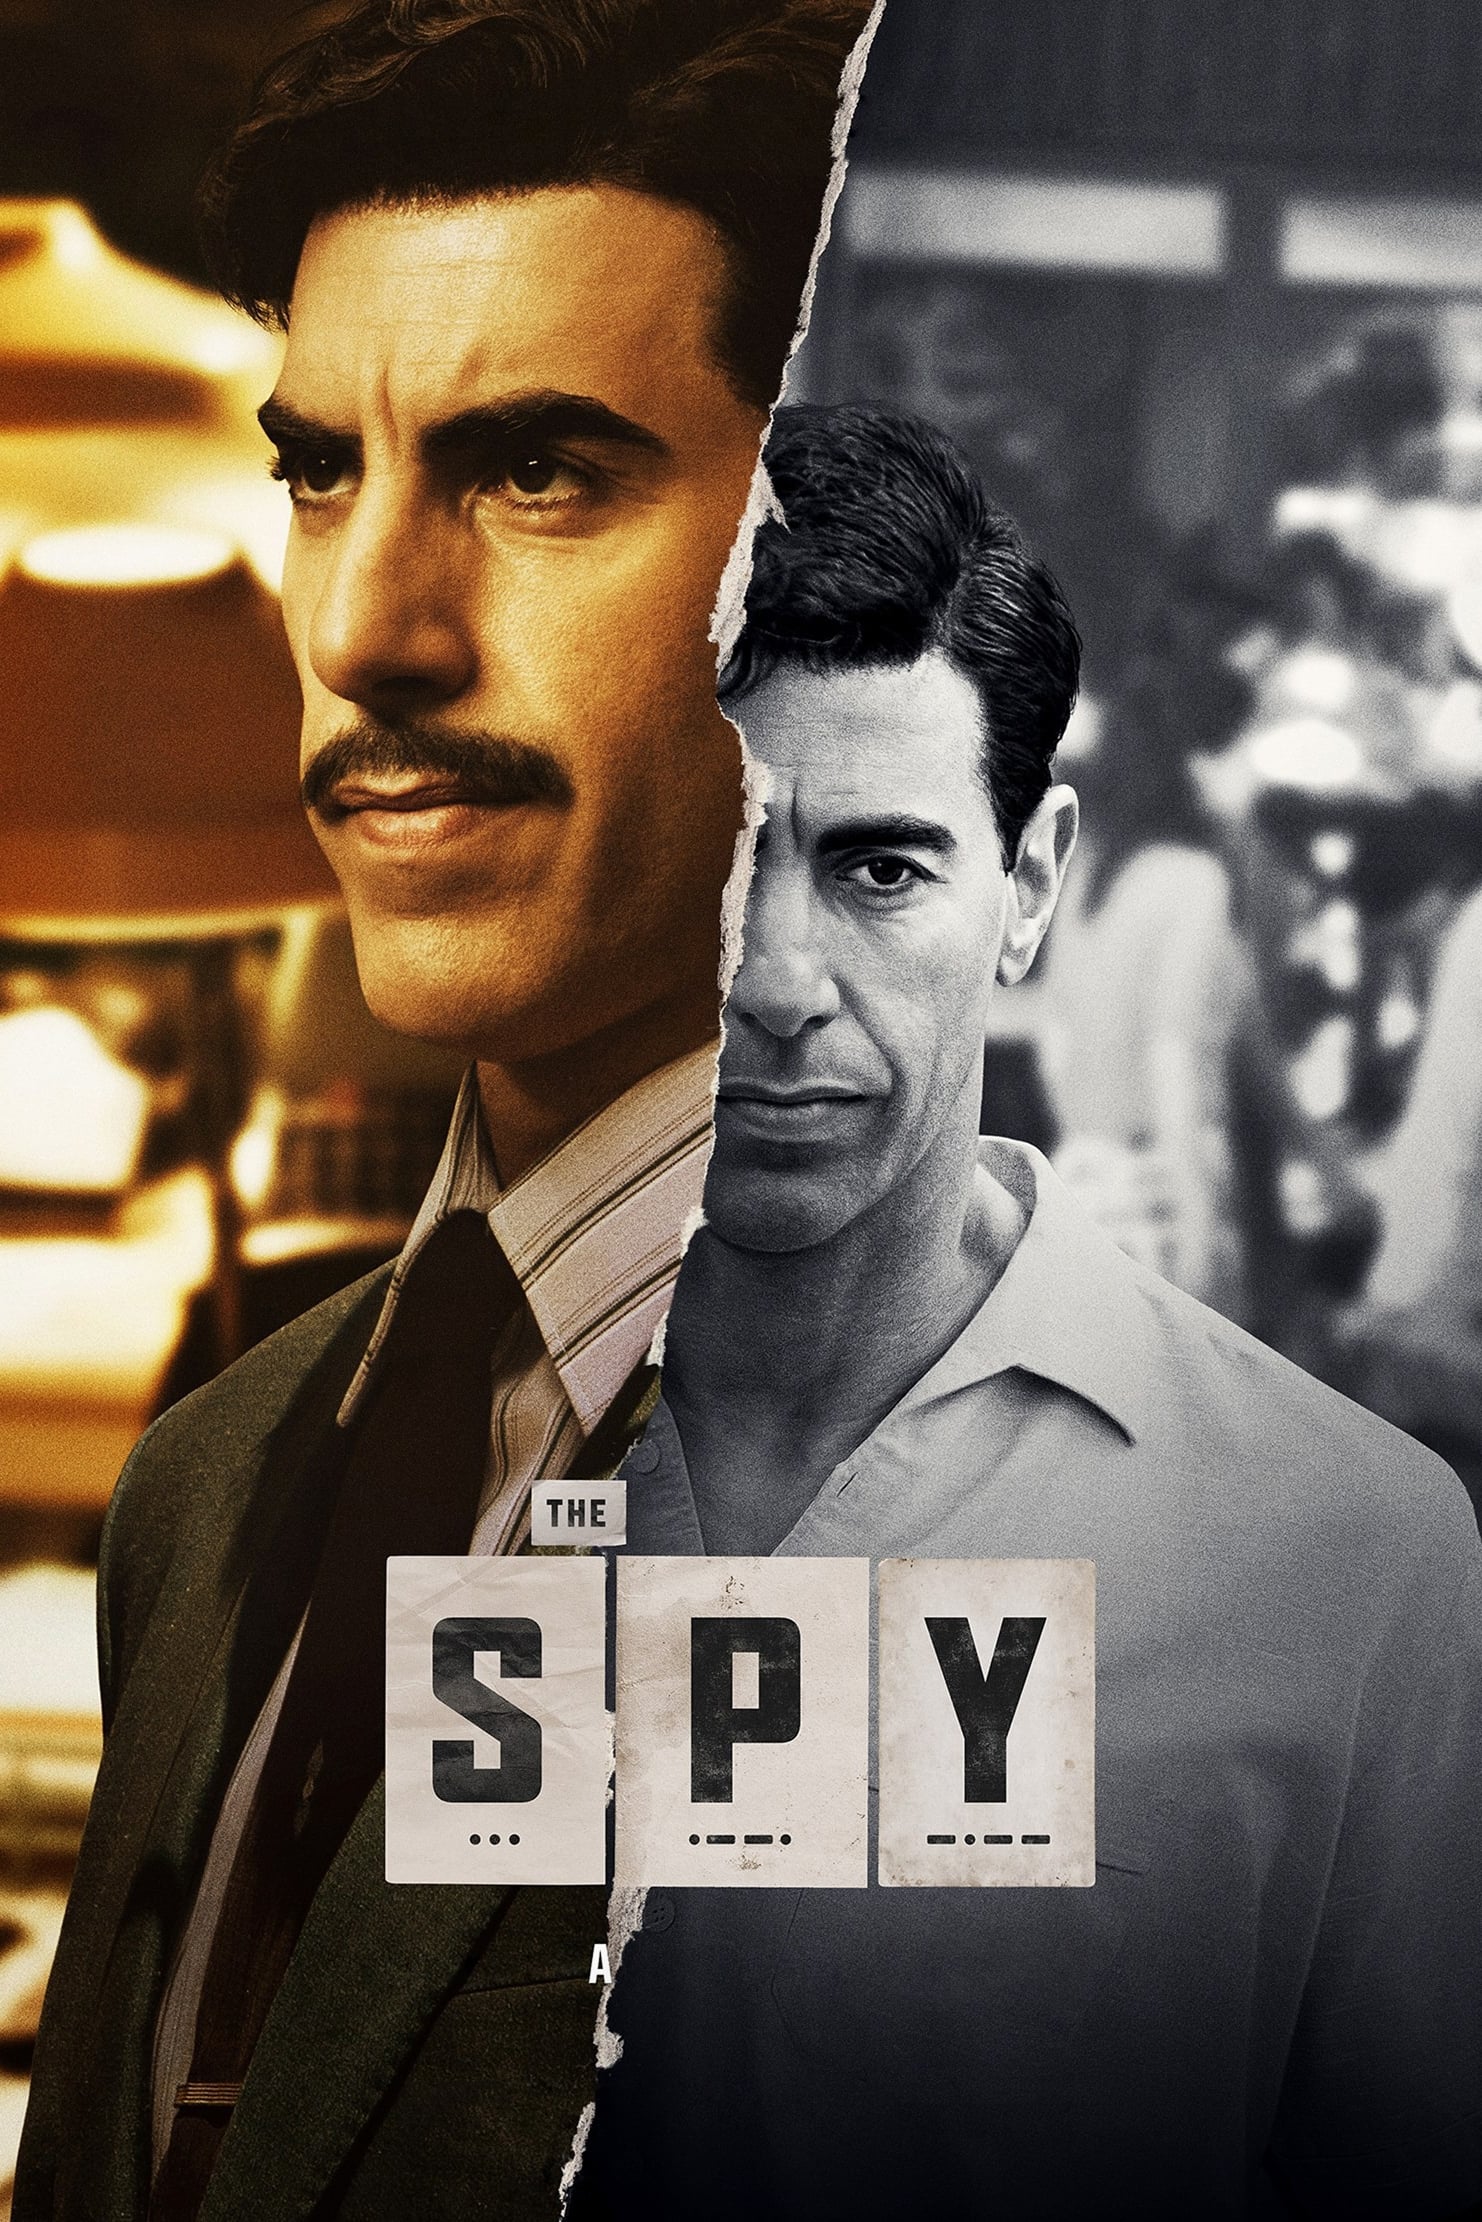 The Spy TV Shows About Espionage